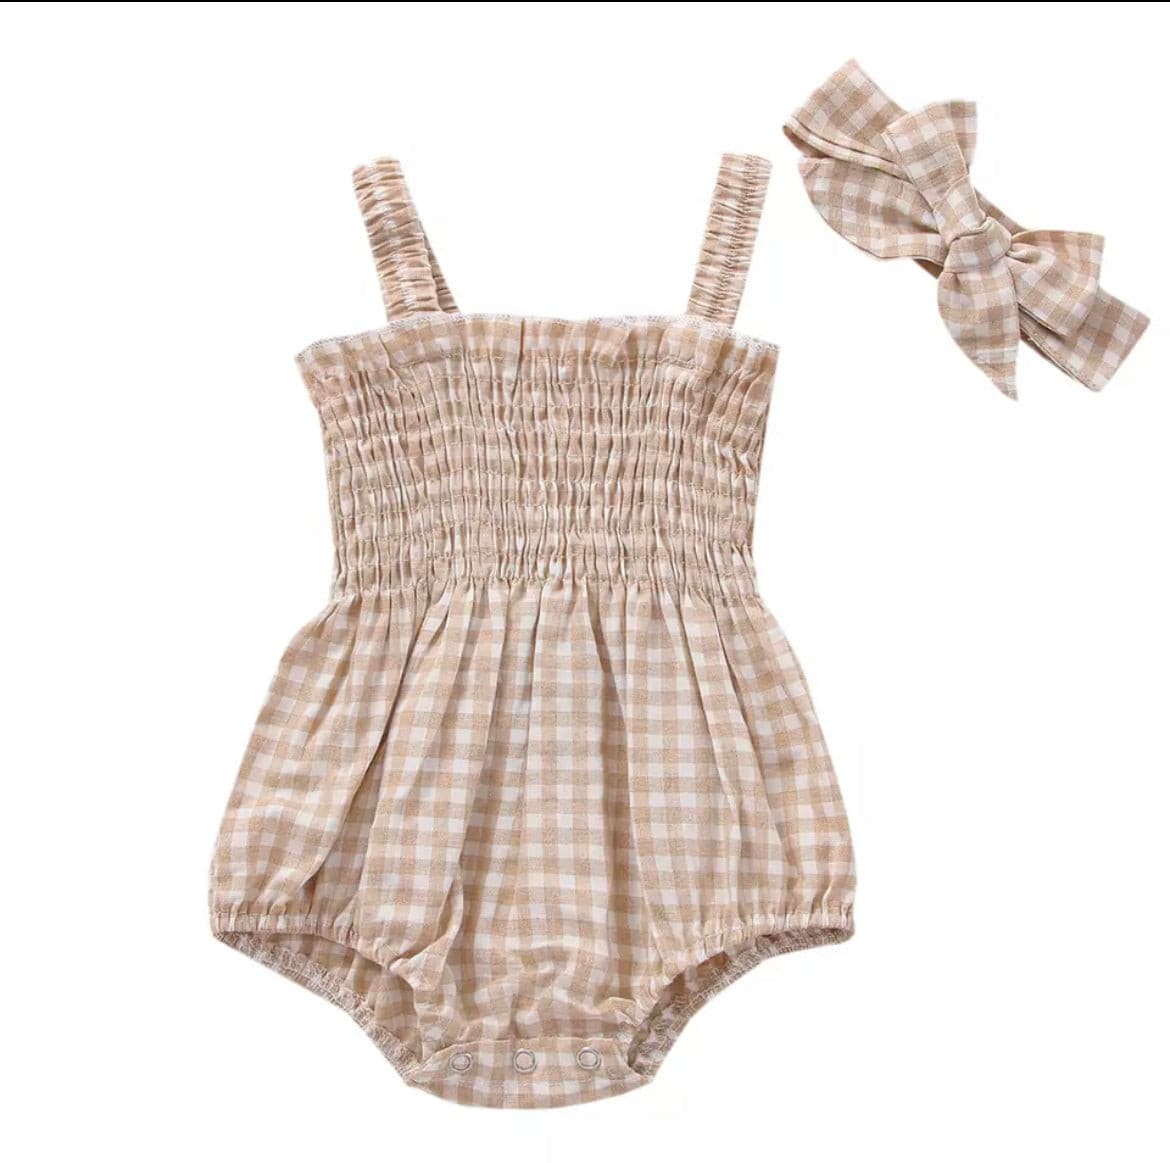 Ally Romper - Gingham print with matching headband.